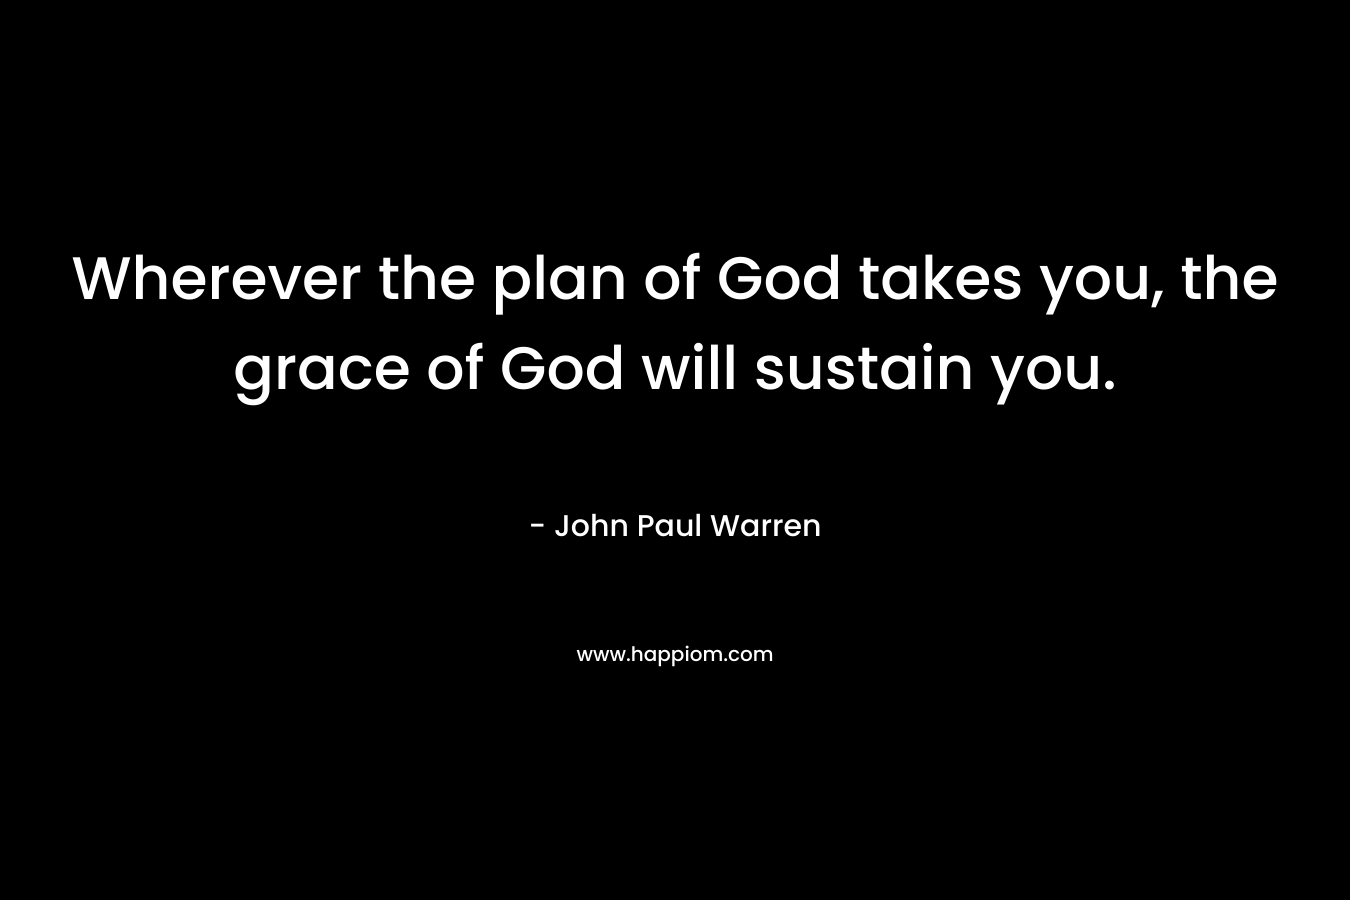 Wherever the plan of God takes you, the grace of God will sustain you. – John Paul Warren